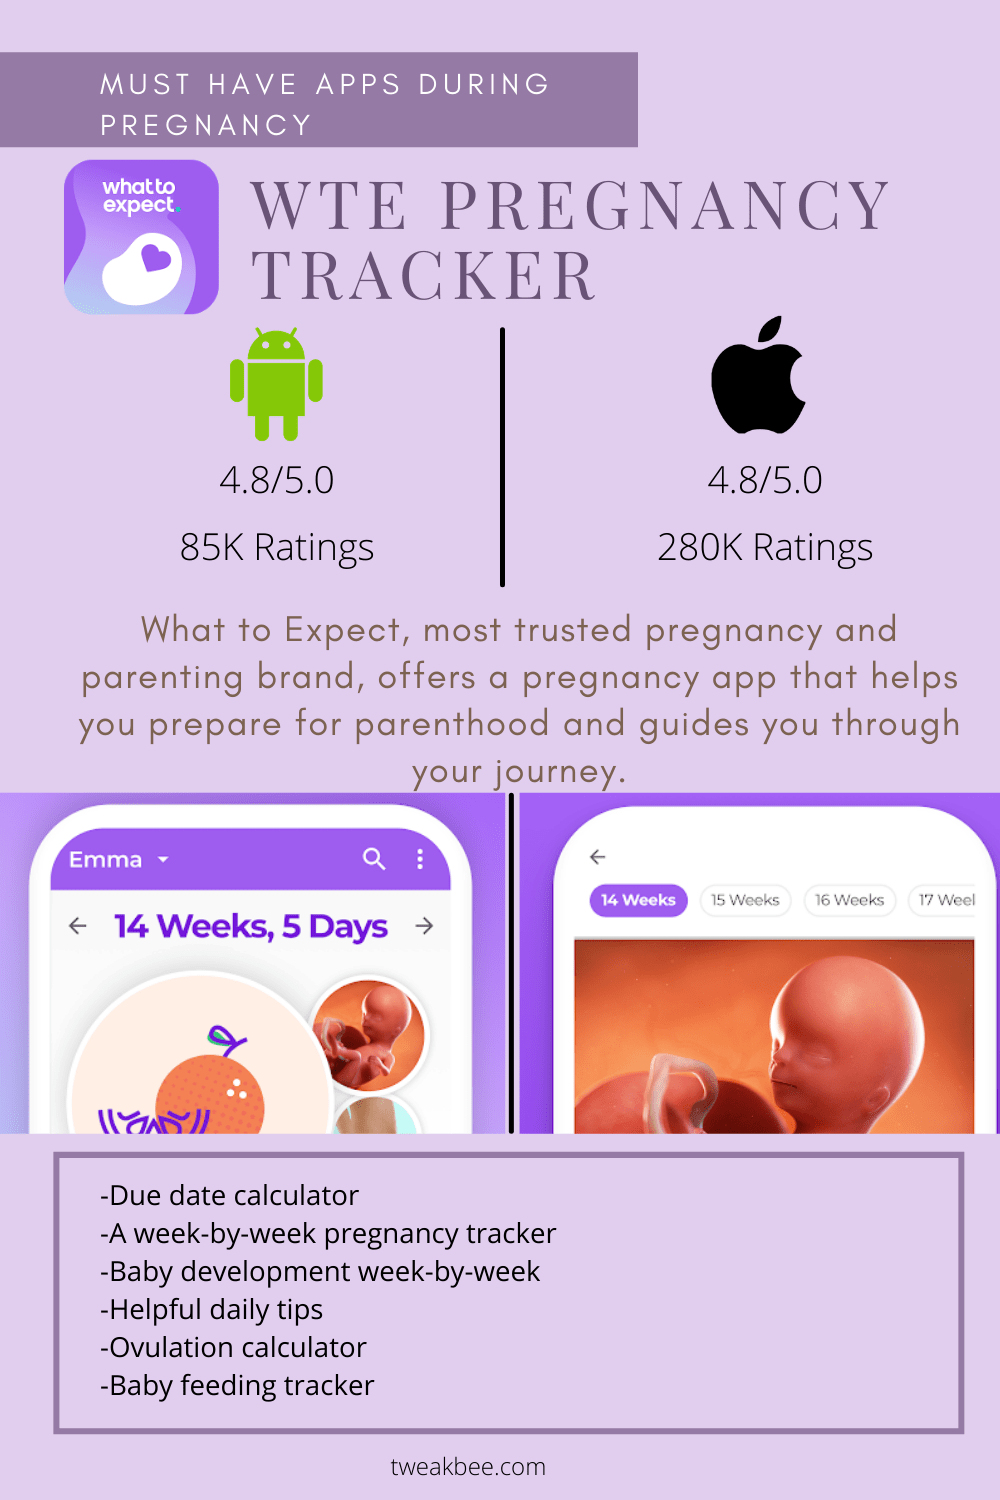 wte Pregnancy app review - Must Have Apps During Pregnancy